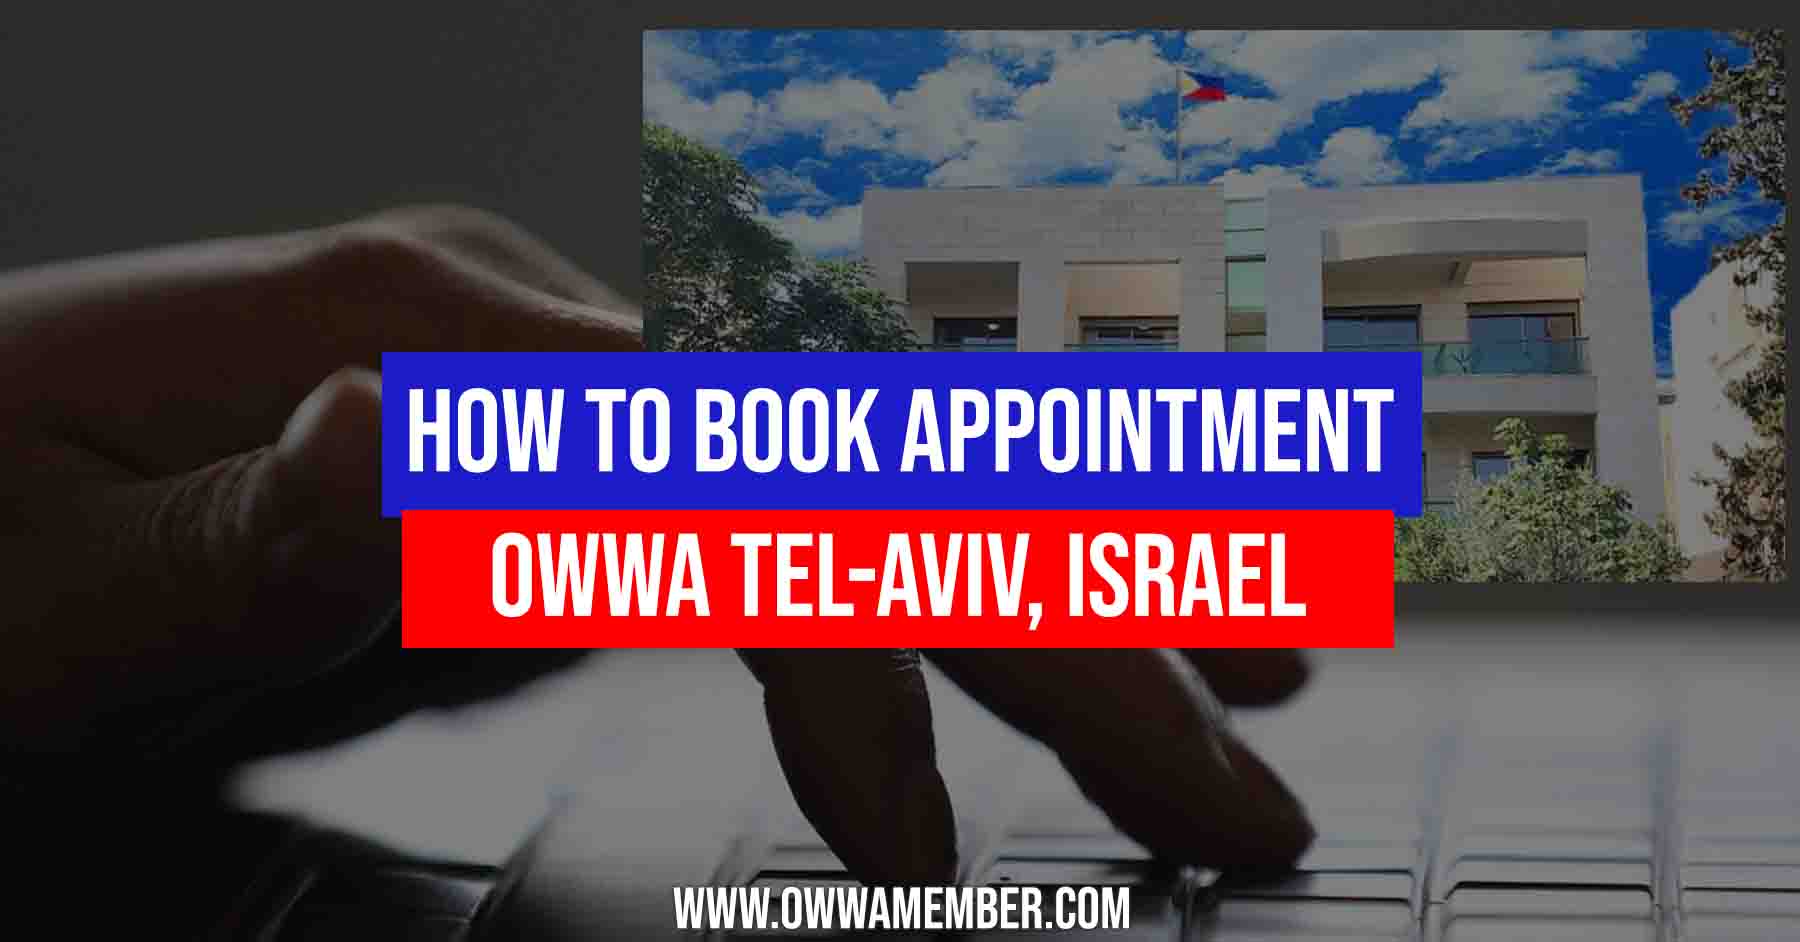 how to book appointment owwa tel aviv israel